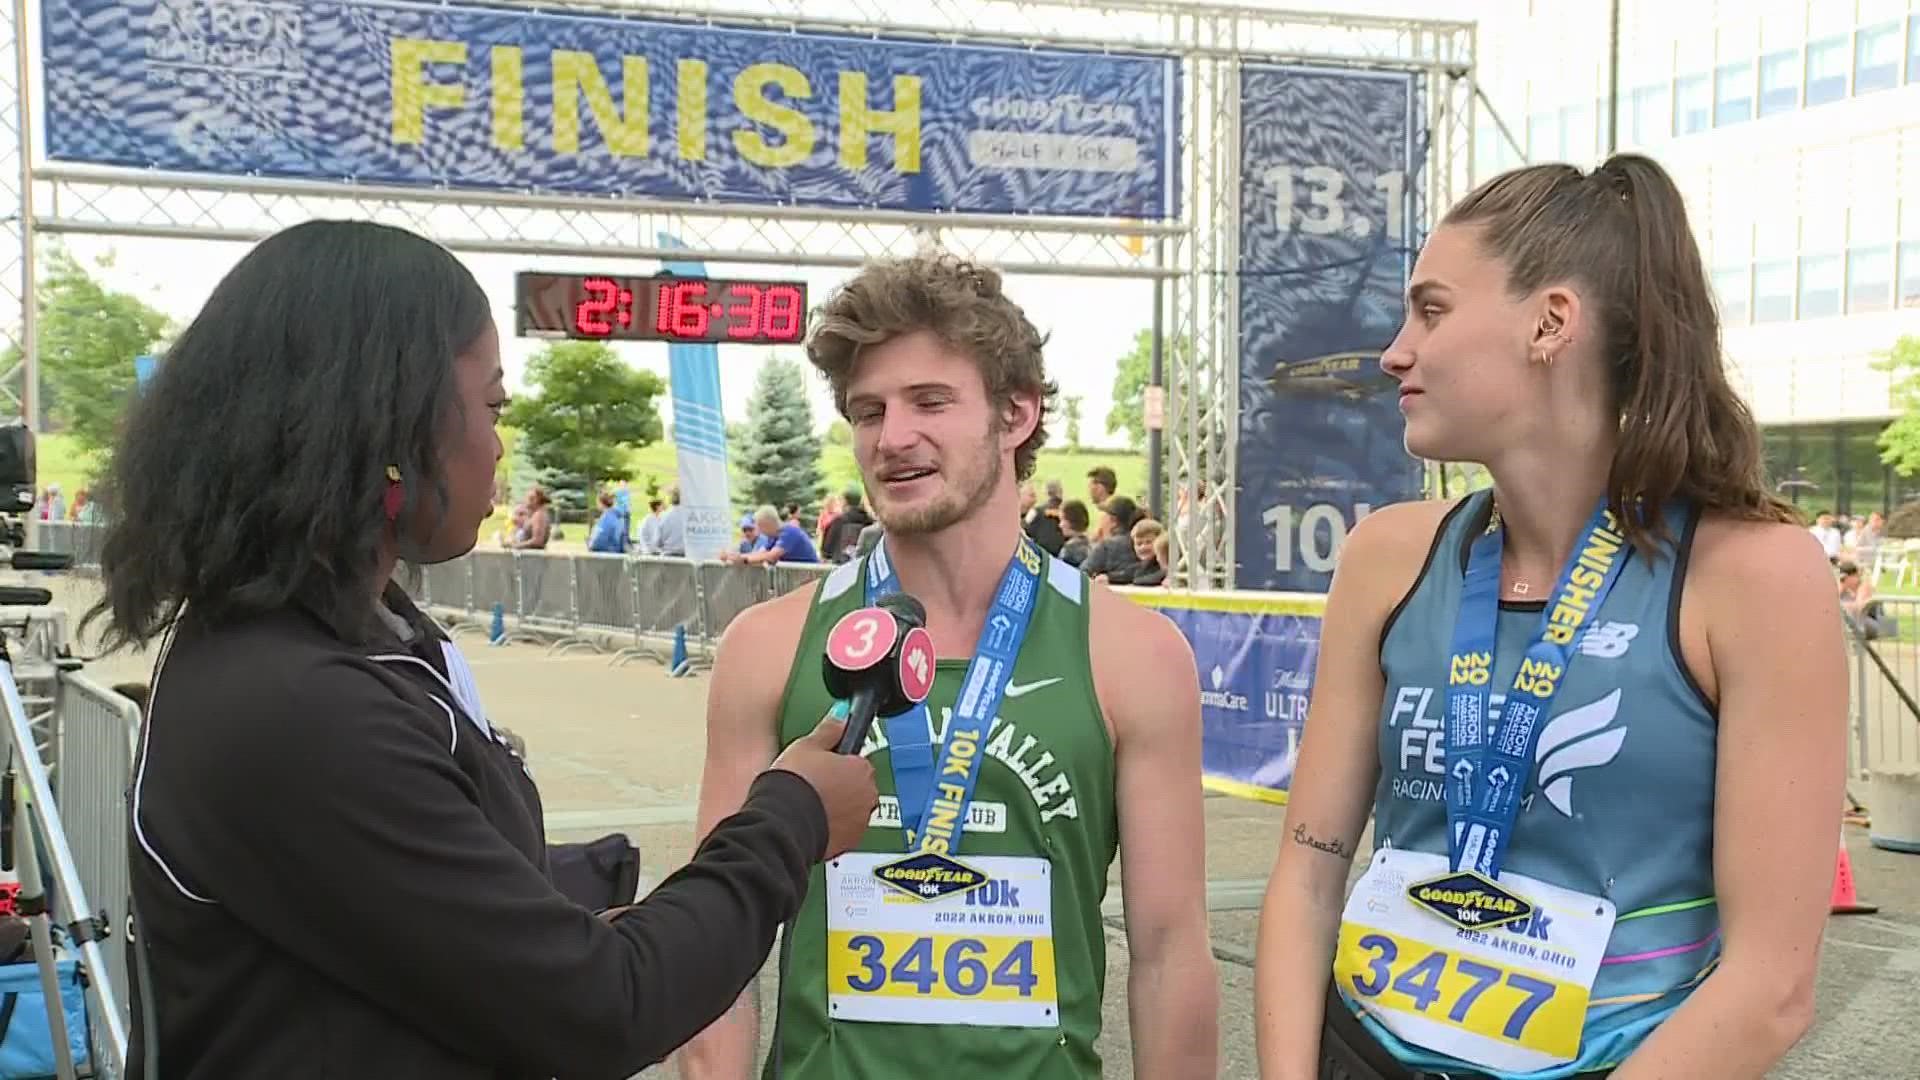 3News' Kierra Cotton caught up with the winners of the Goodyear 10K in Akron, Ohio.